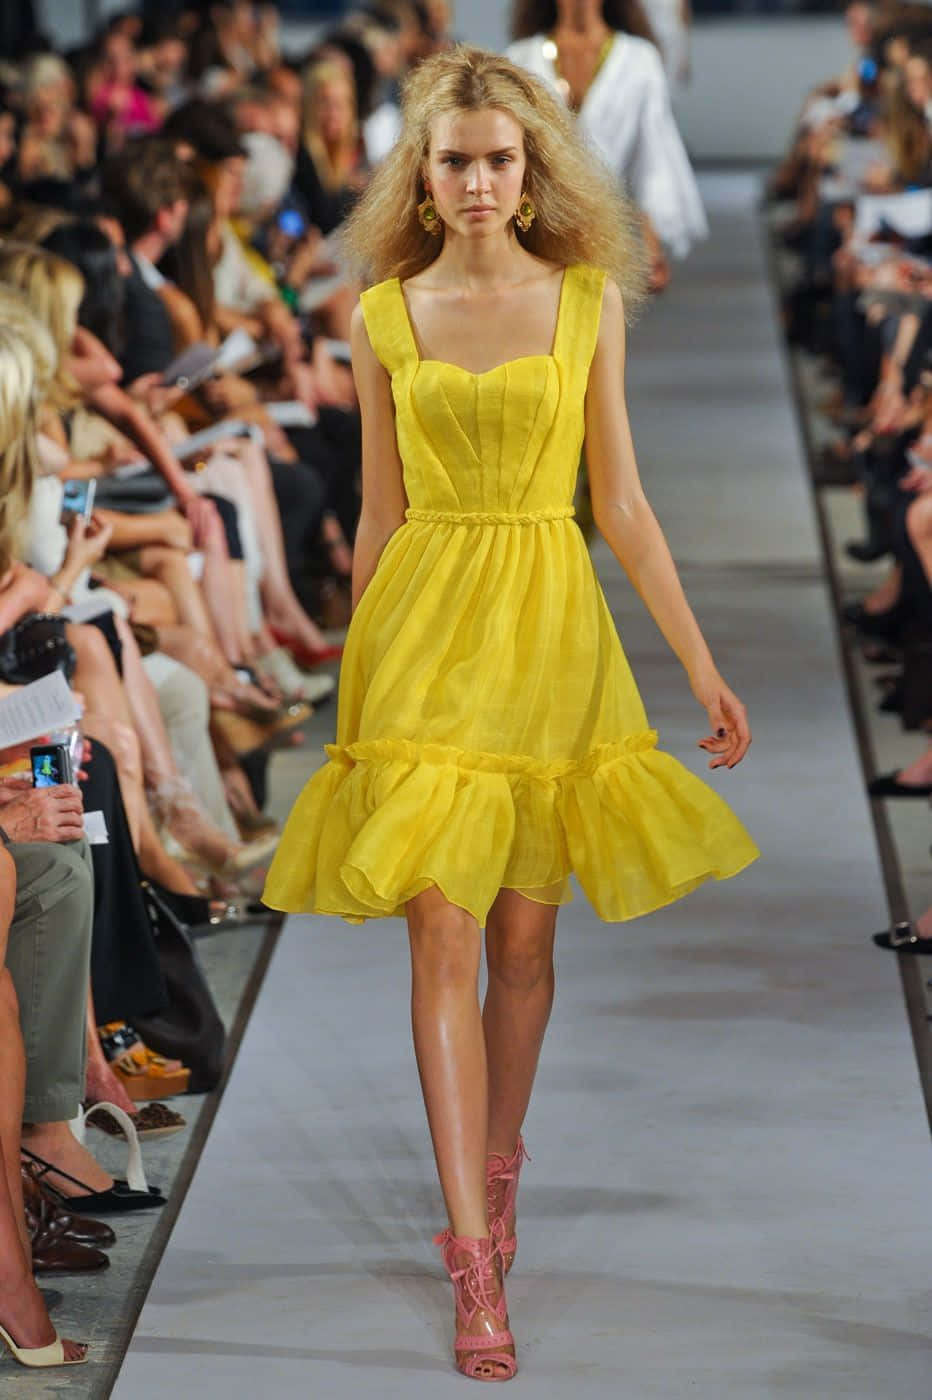 Radiant Yellow Dress with Elegant Style Wallpaper